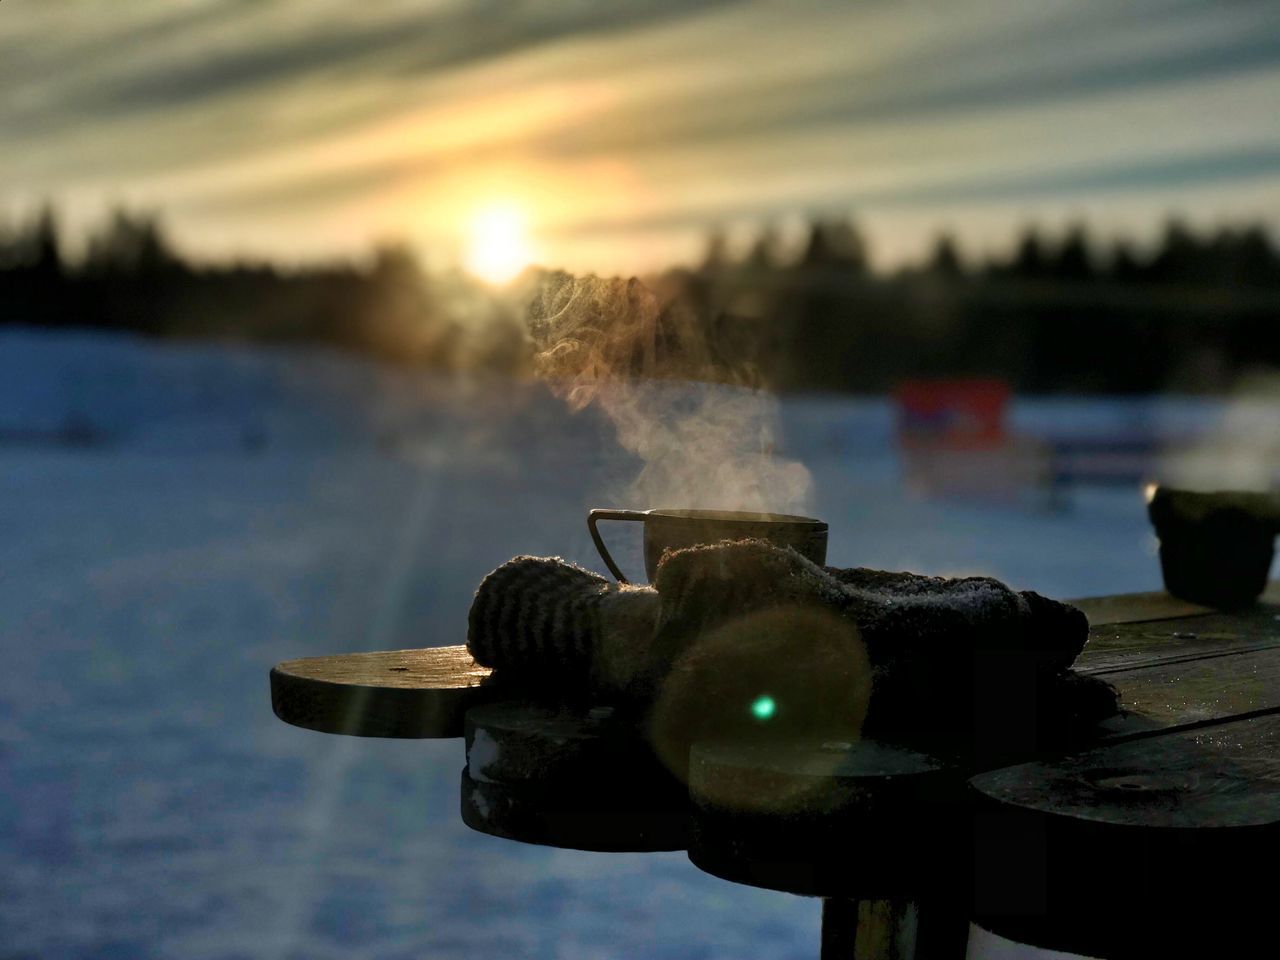 water, focus on foreground, nature, sky, sunset, no people, close-up, outdoors, reflection, cloud - sky, lake, day, steam, sunlight, selective focus, cup, metal, smoke - physical structure, lighting equipment